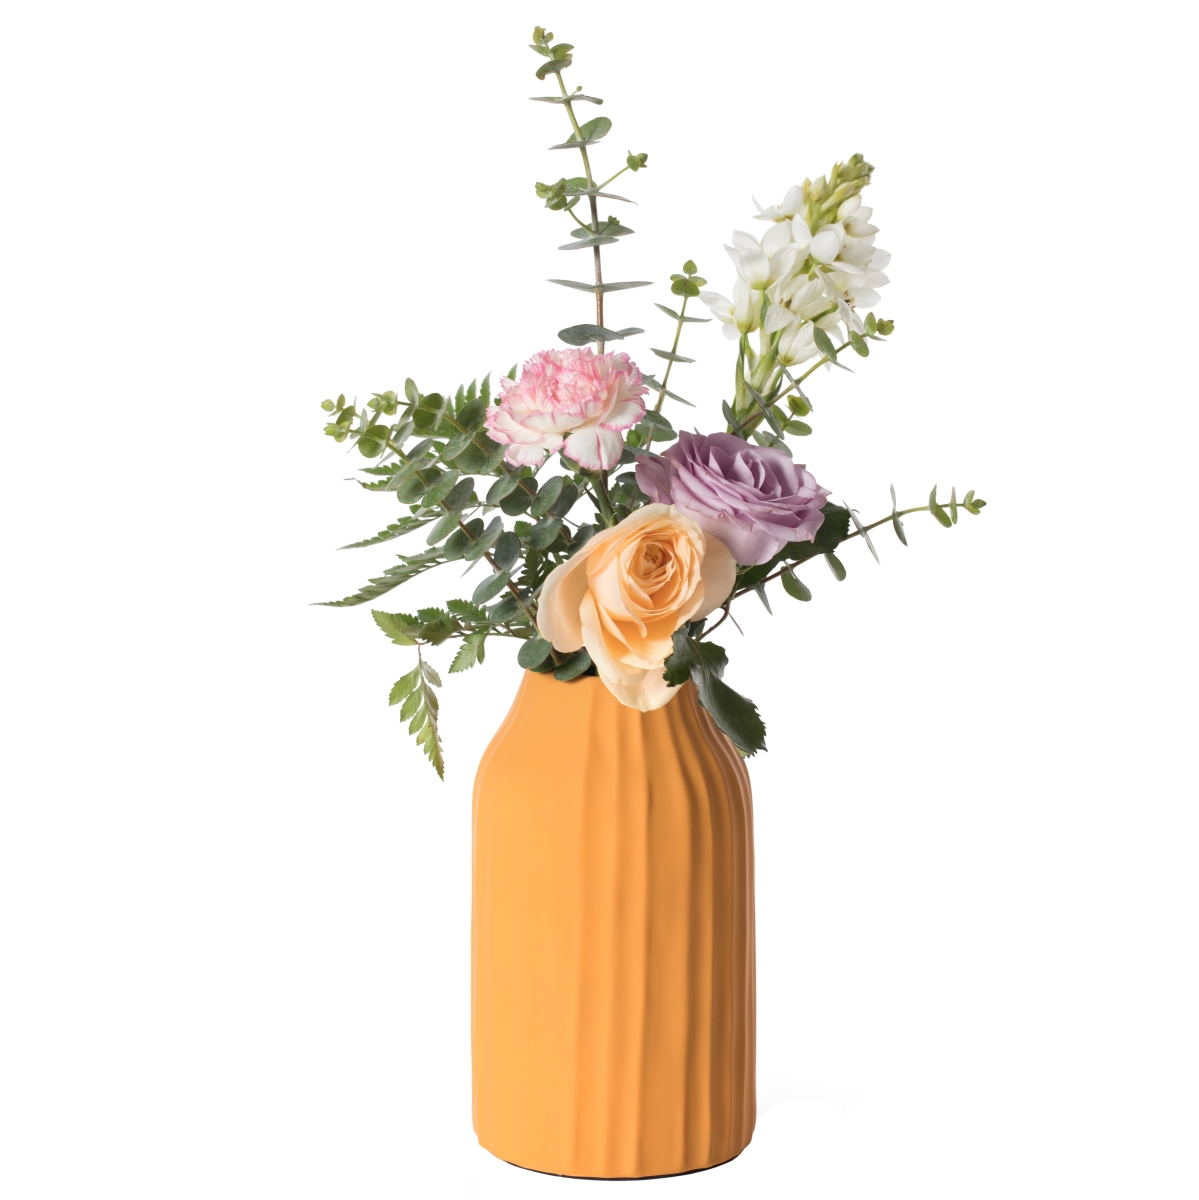 Picture of Fabulaxe QI004055.MD 4.5 x 8 in. Round Decorative Ceramic Sculpture Channeled Centerpiece Table Vase, Yellow